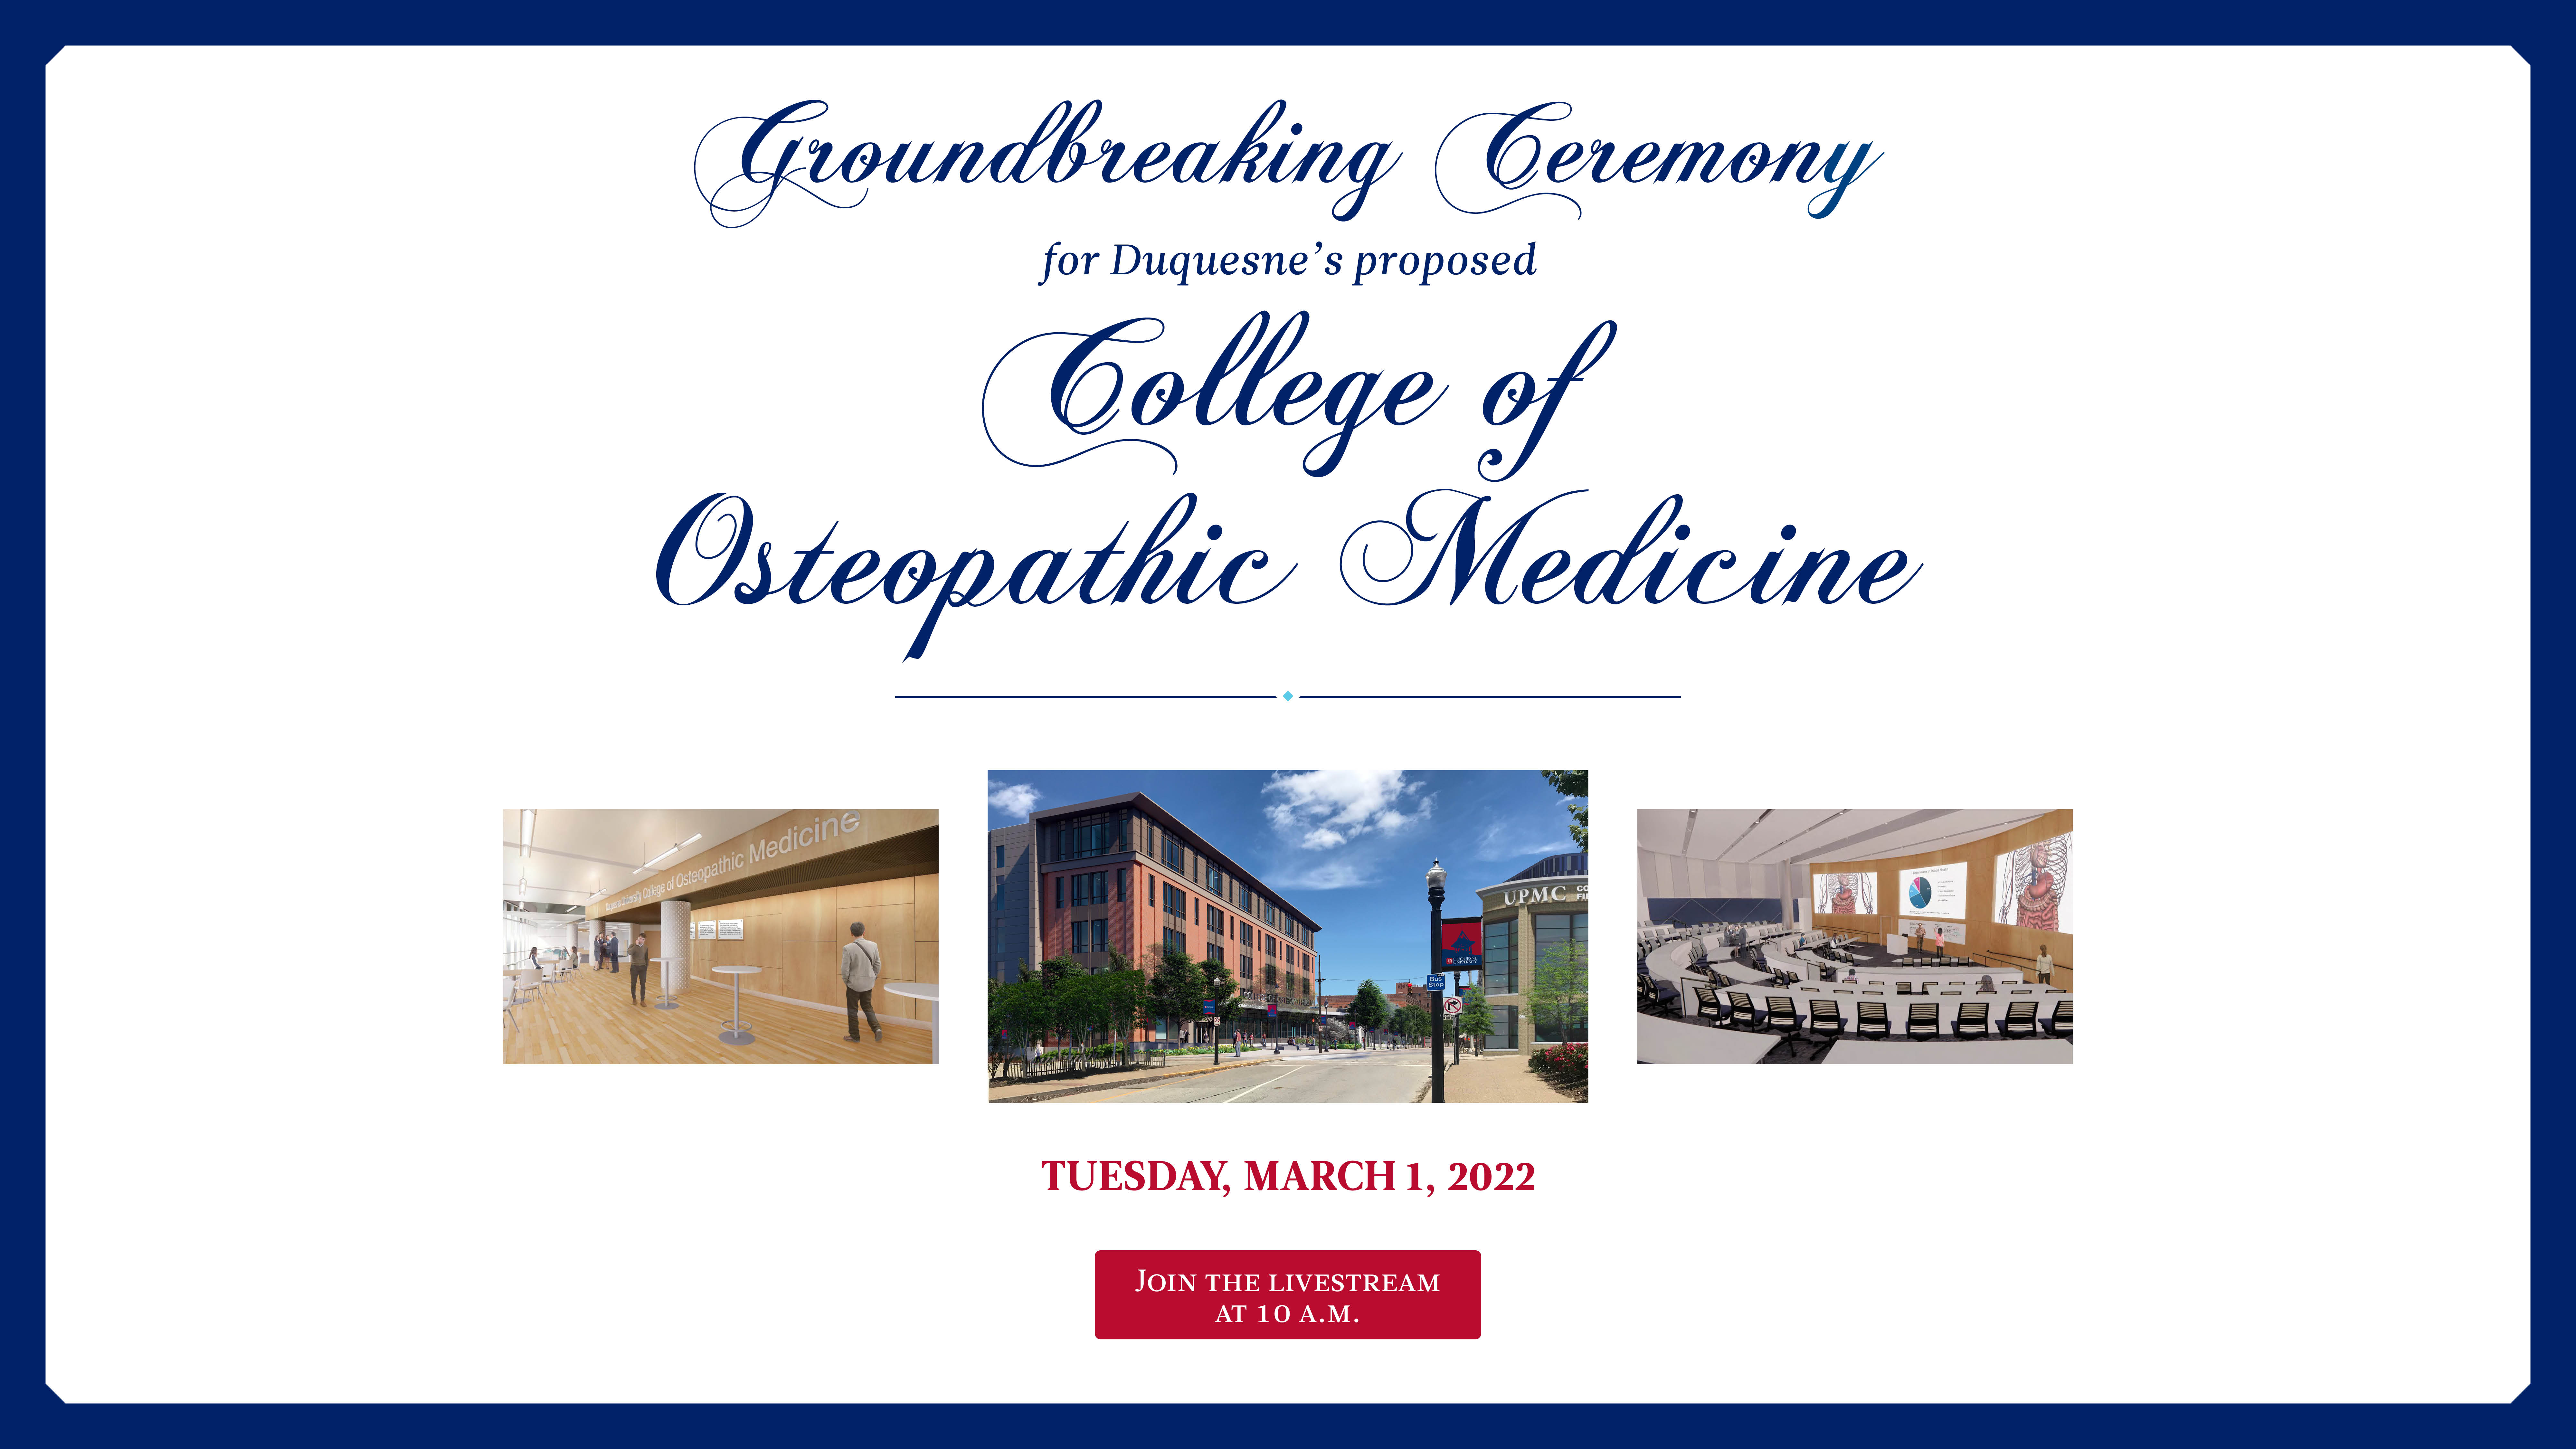 Image for Livestream of Groundbreaking Ceremony for Duquesne's proposed College of Osteopathic Medicine webinar